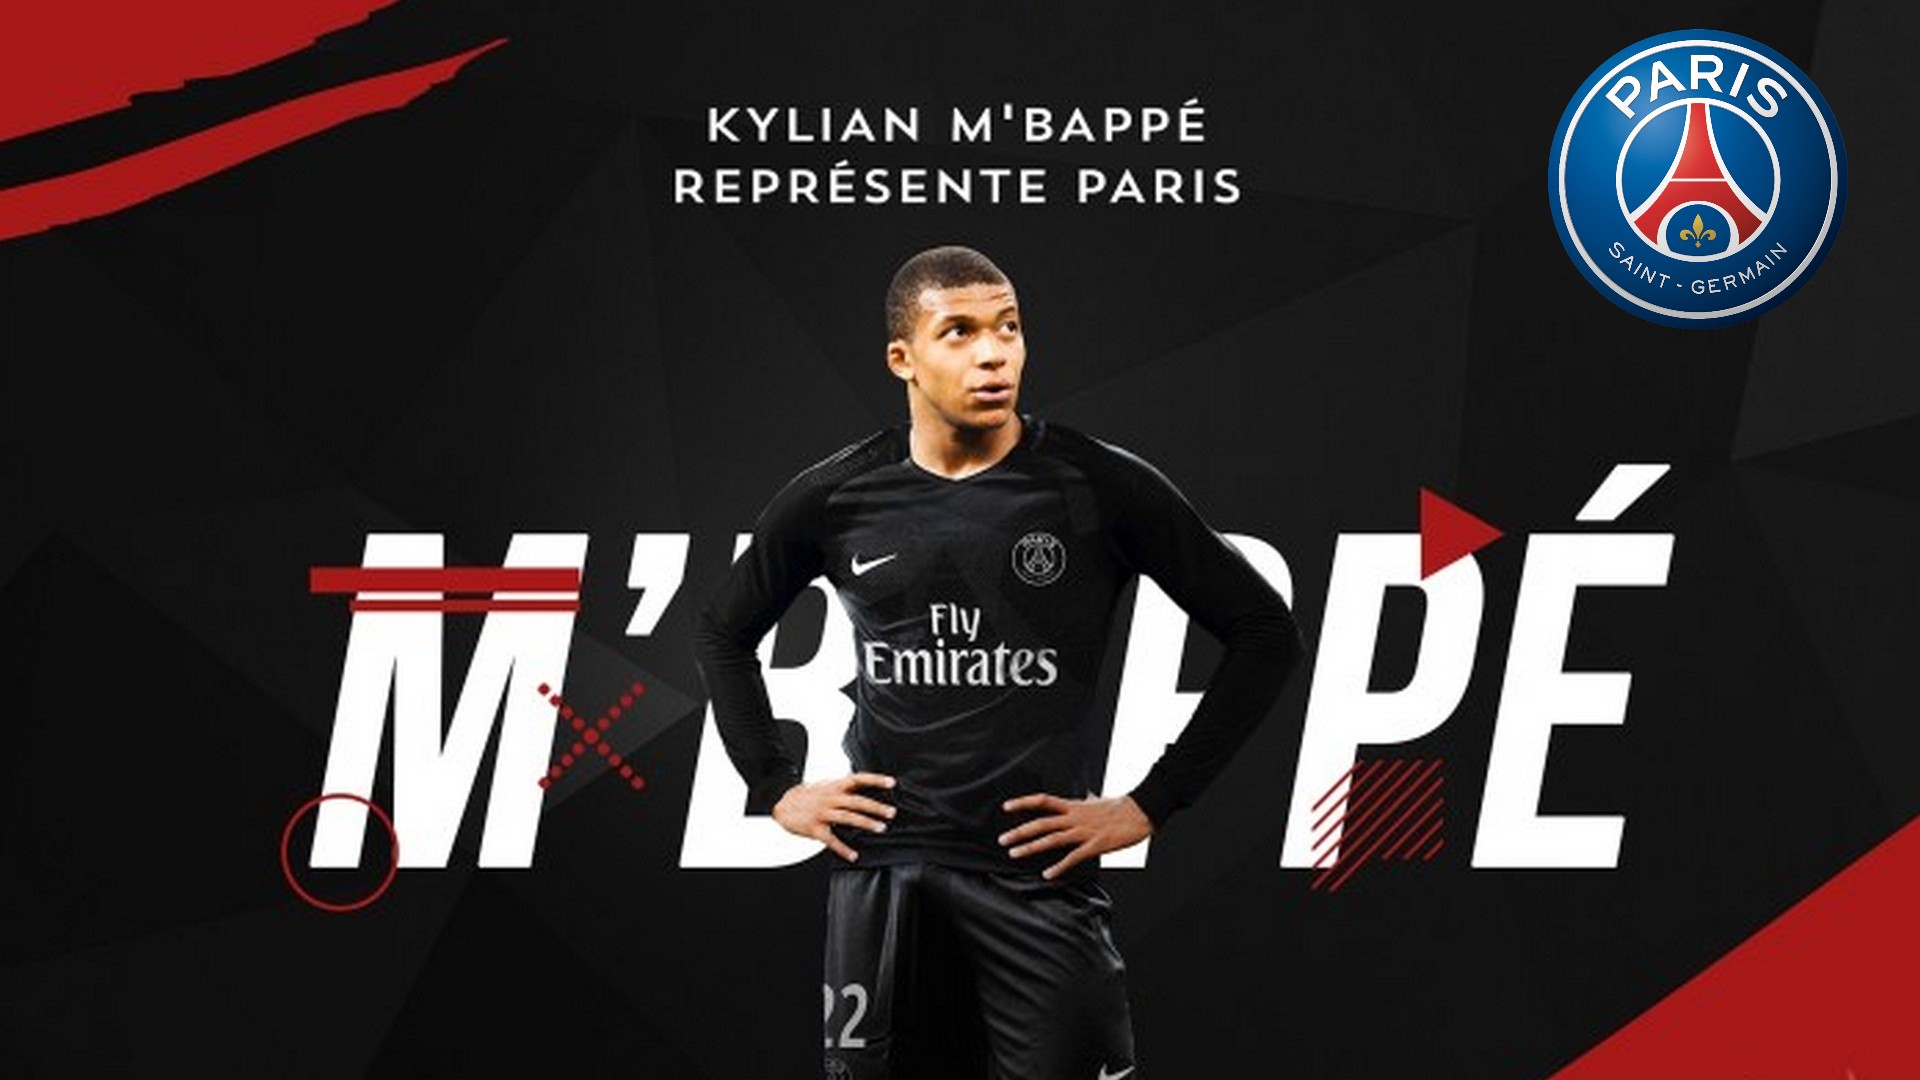 Wallpapers HD Kylian Mbappe PSG With Resolution 1920X1080 pixel. You can make this wallpaper for your Mac or Windows Desktop Background, iPhone, Android or Tablet and another Smartphone device for free